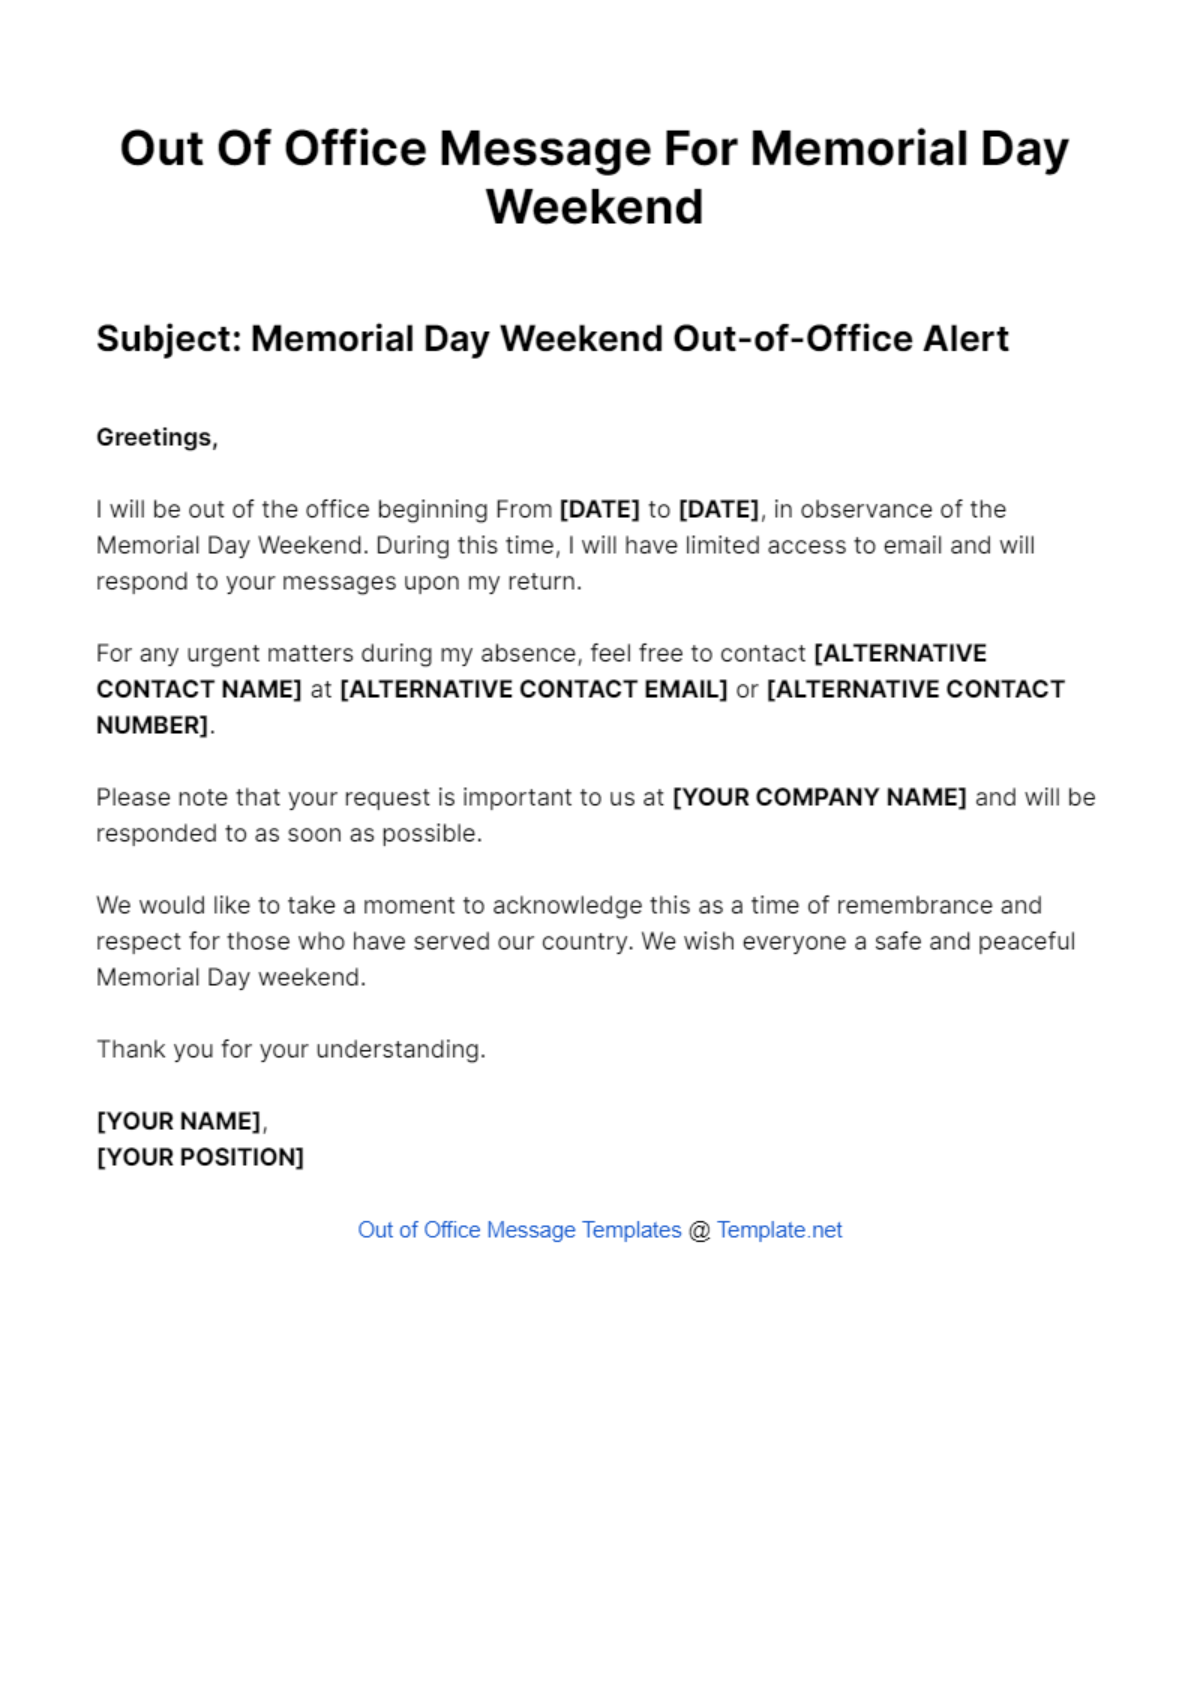 Free Out Of Office Message For Memorial Day Weekend Template